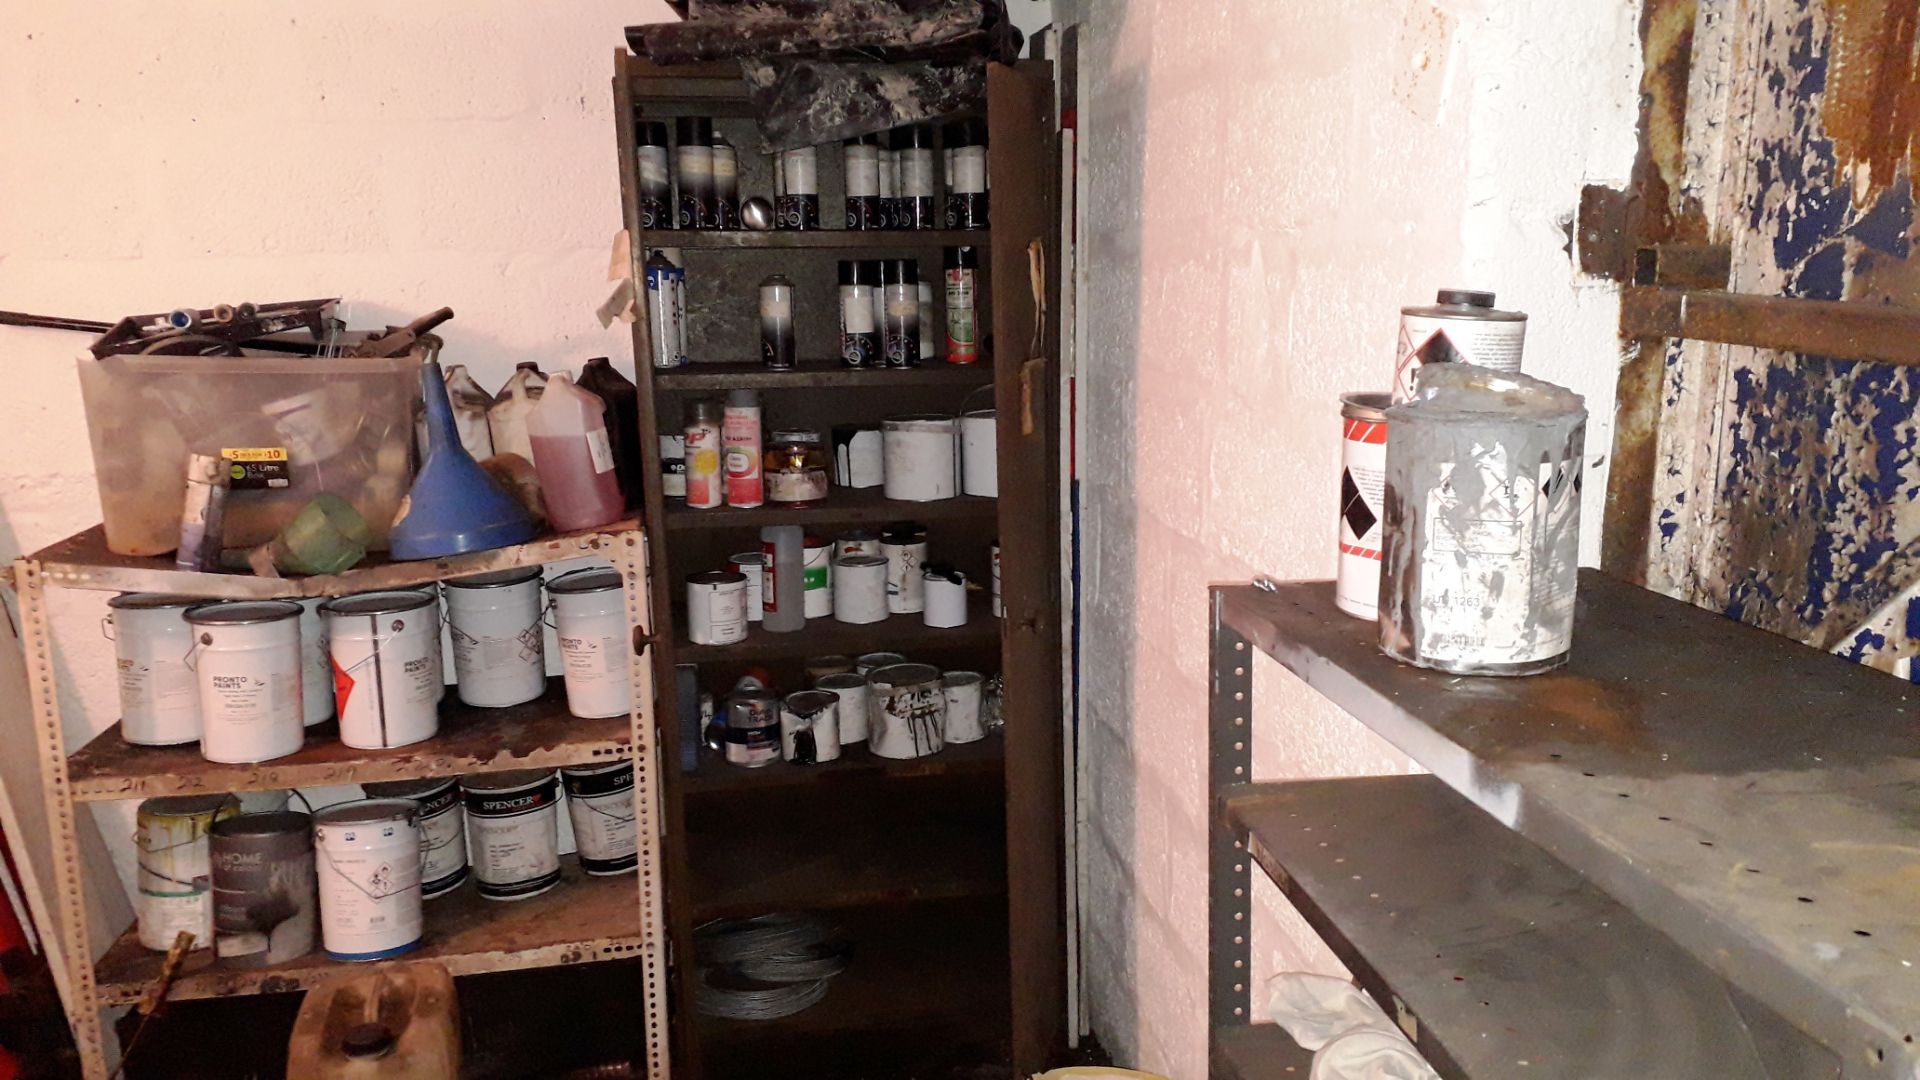 Contents of Room comprising of Paints, Treatments, Plastic Barrier, Jerry Can etc.